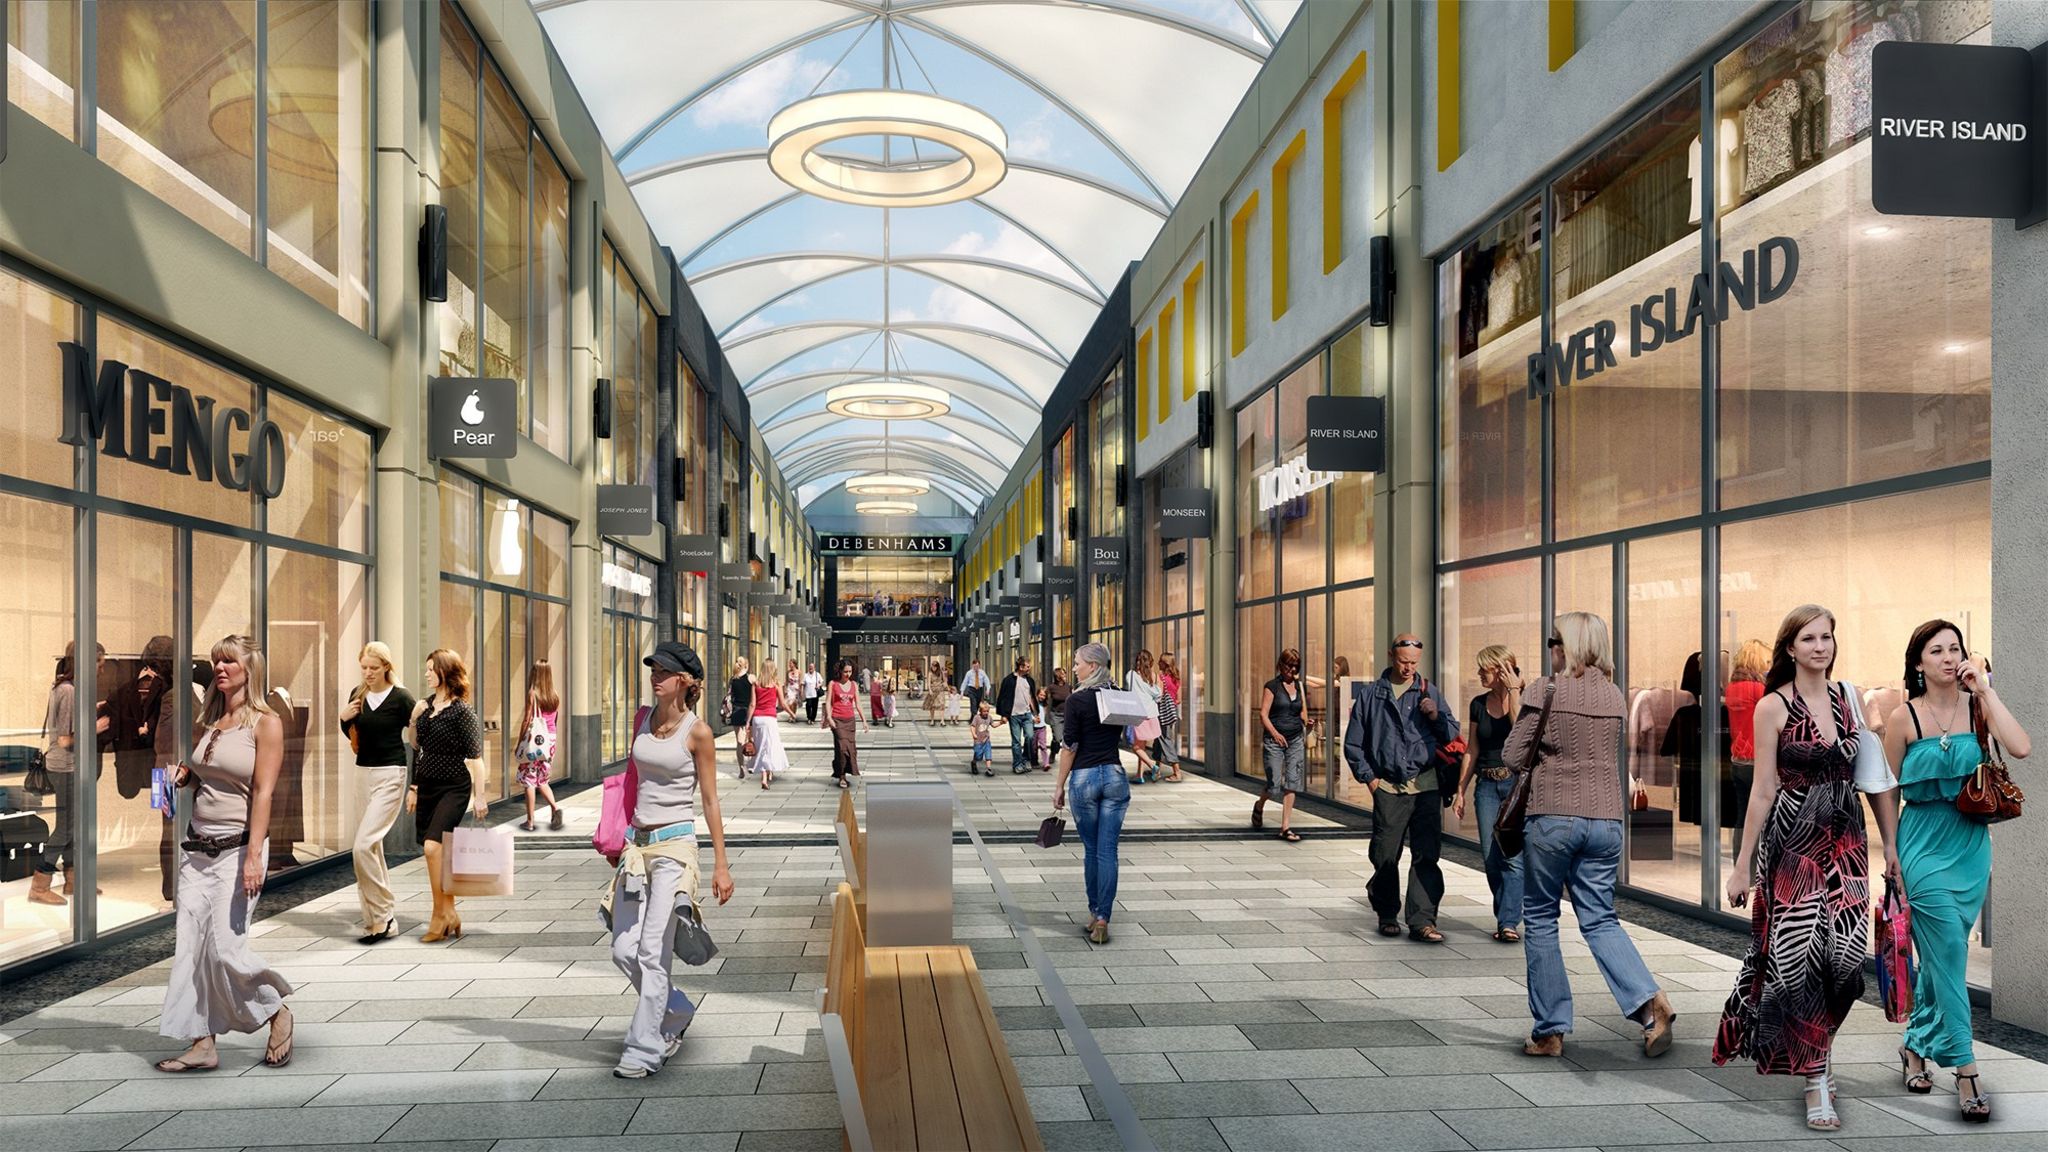 Artist impression of the shopping complex